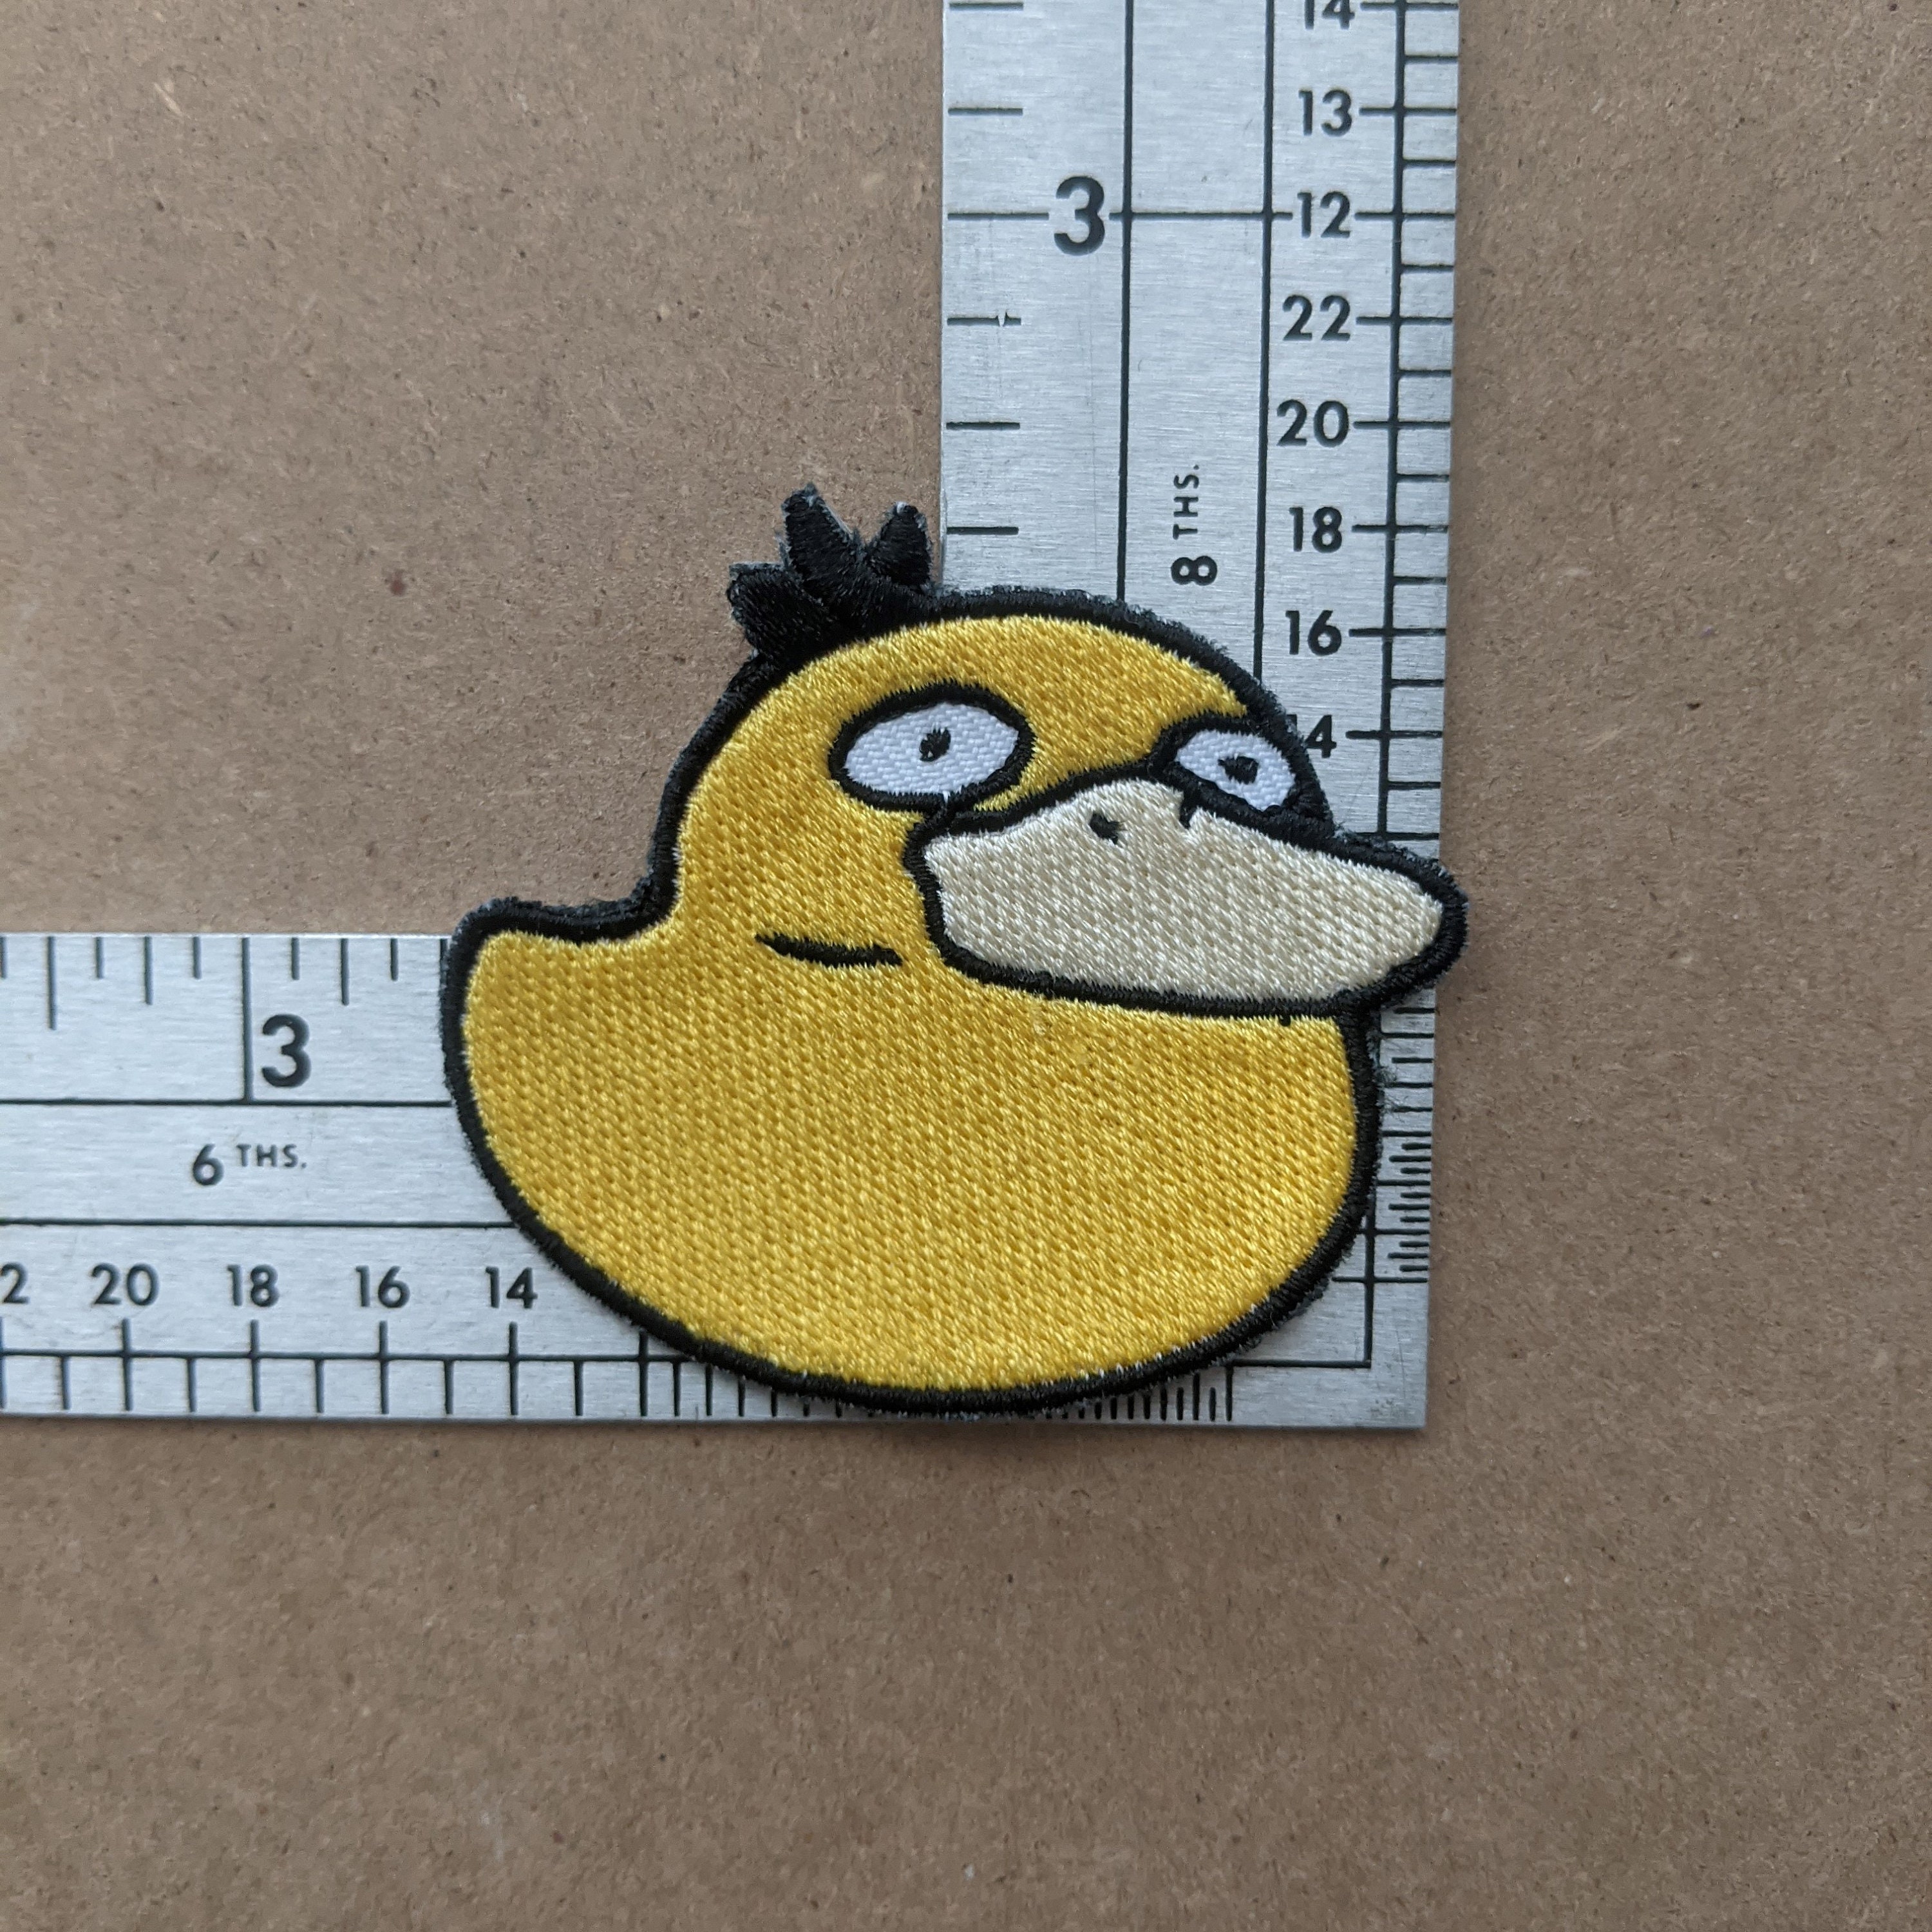 Psyduck Pokemon Custom Embroidered Iron-on/sew-on Patch, Squirt